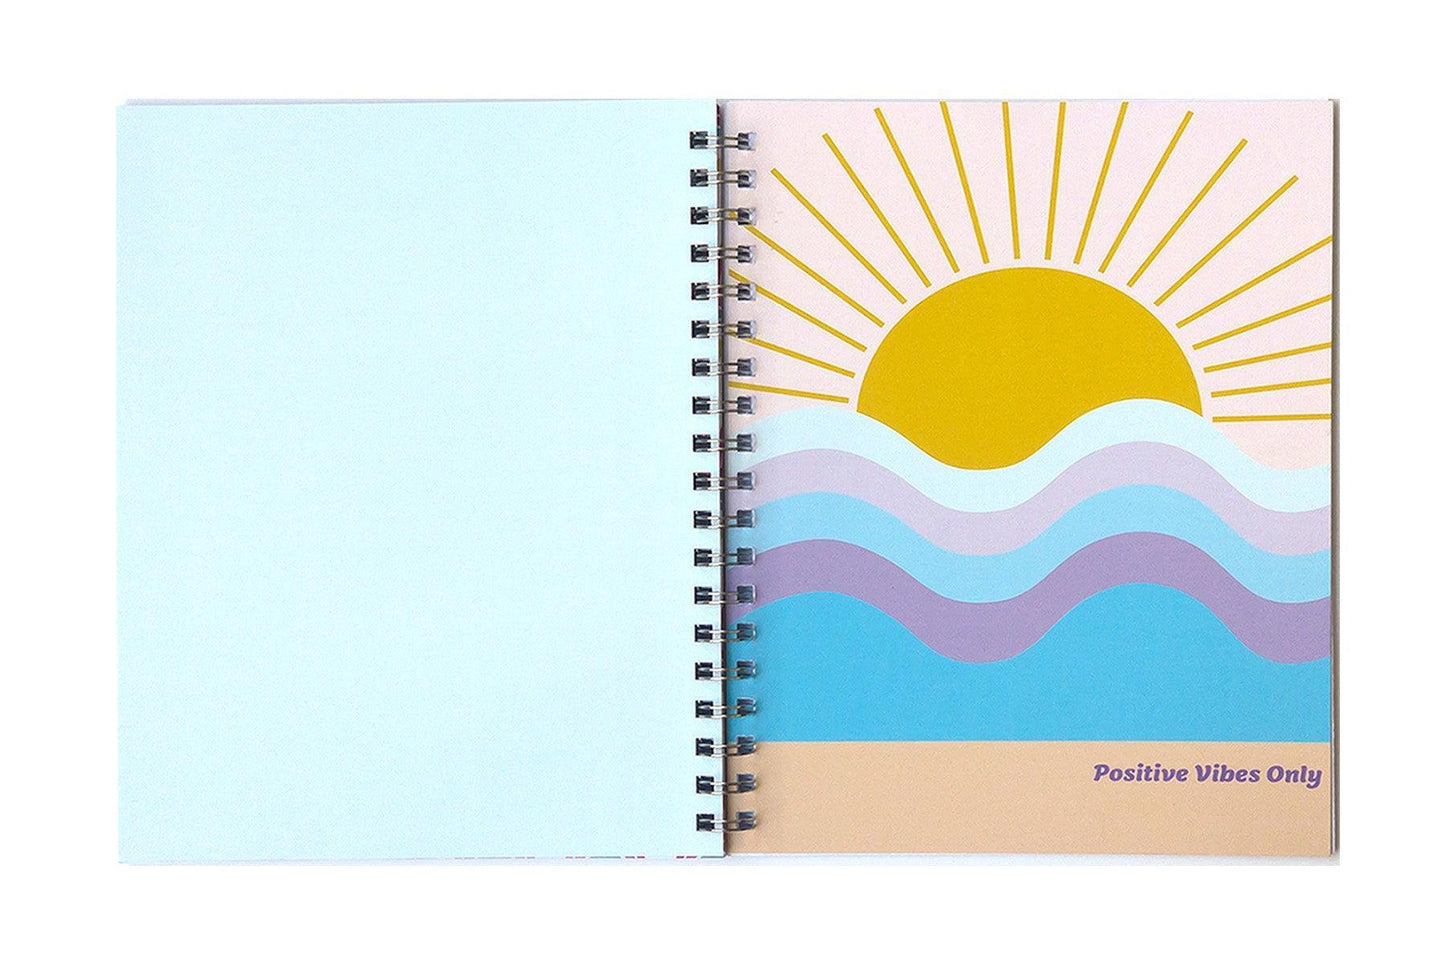 Positive Vibes Only Journal - Sun coming down at horizon of beach front cover with Positive Vibes Only phrase. Light blue back cover.